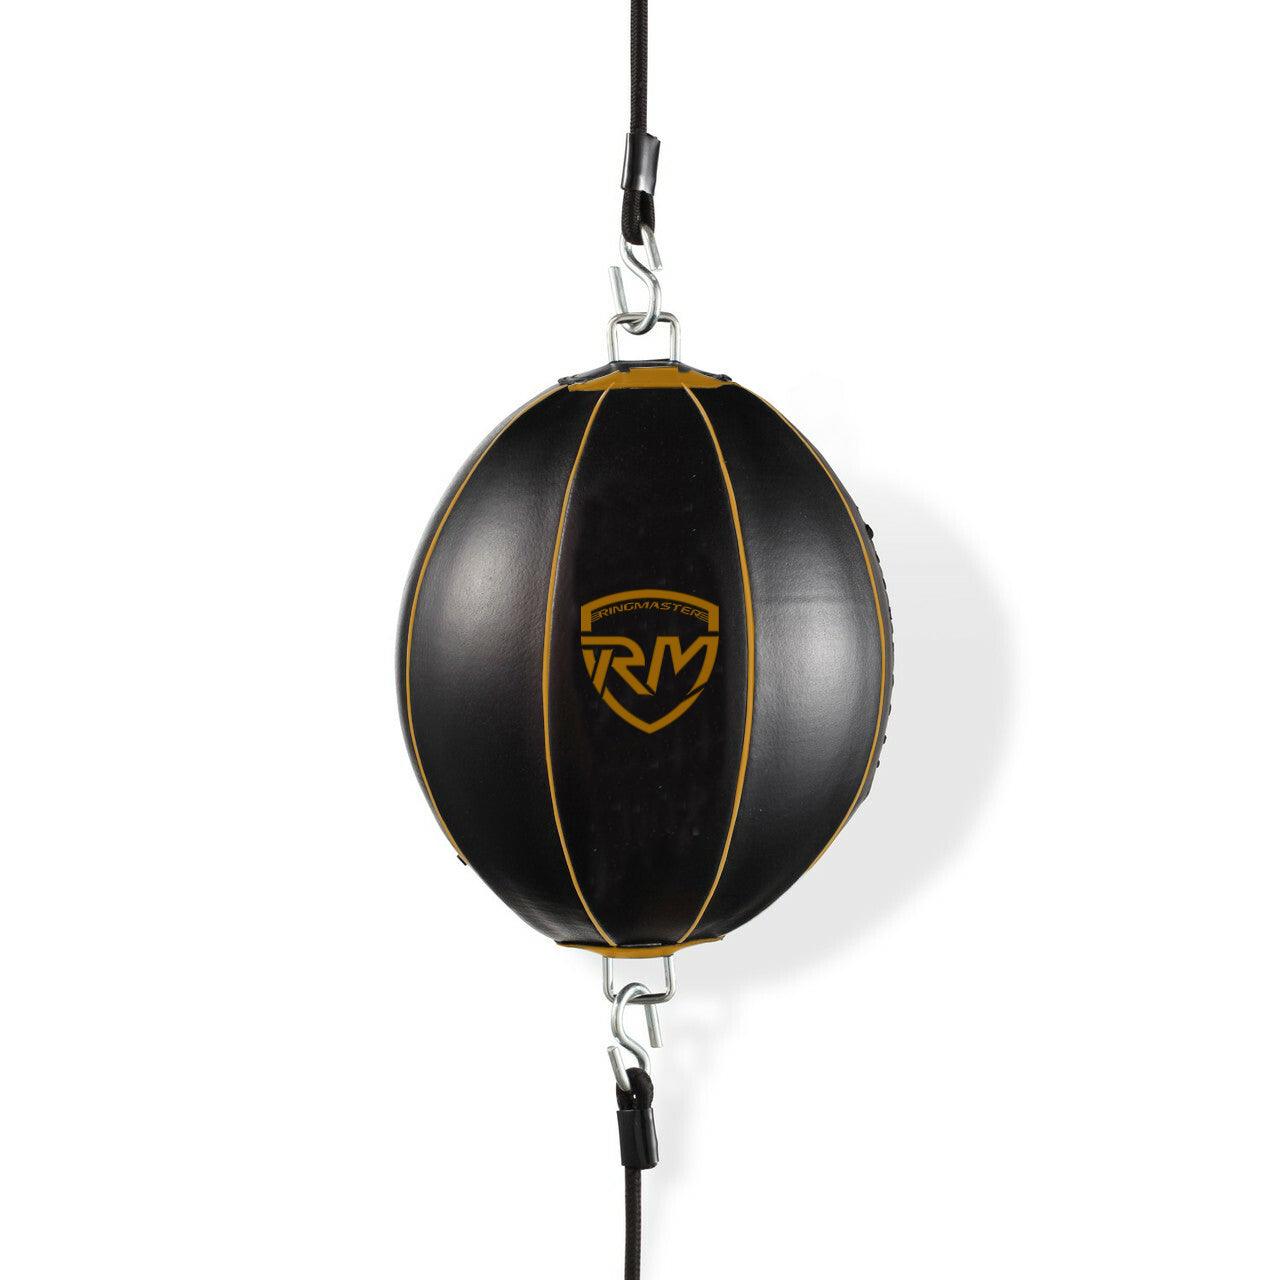 RingMaster Sports Double End Round Speed Ball BoxR Series Synthetic Leather Gold/Black - RINGMASTER SPORTS - Made For Champions